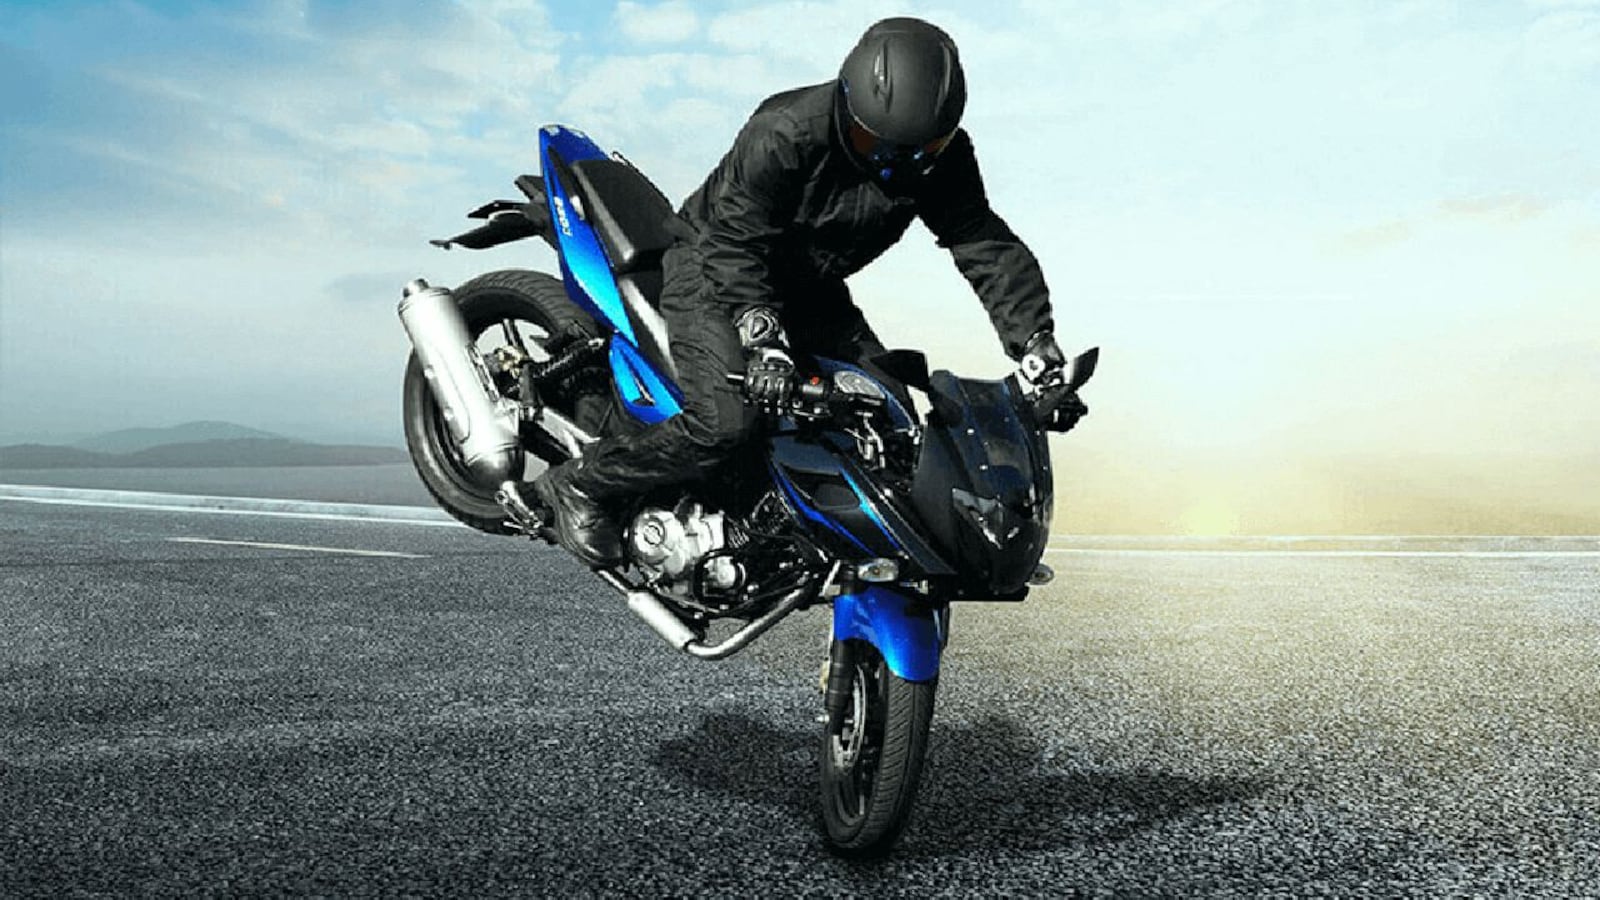 Upcoming Bajaj Pulsar 250: What changes can we expect